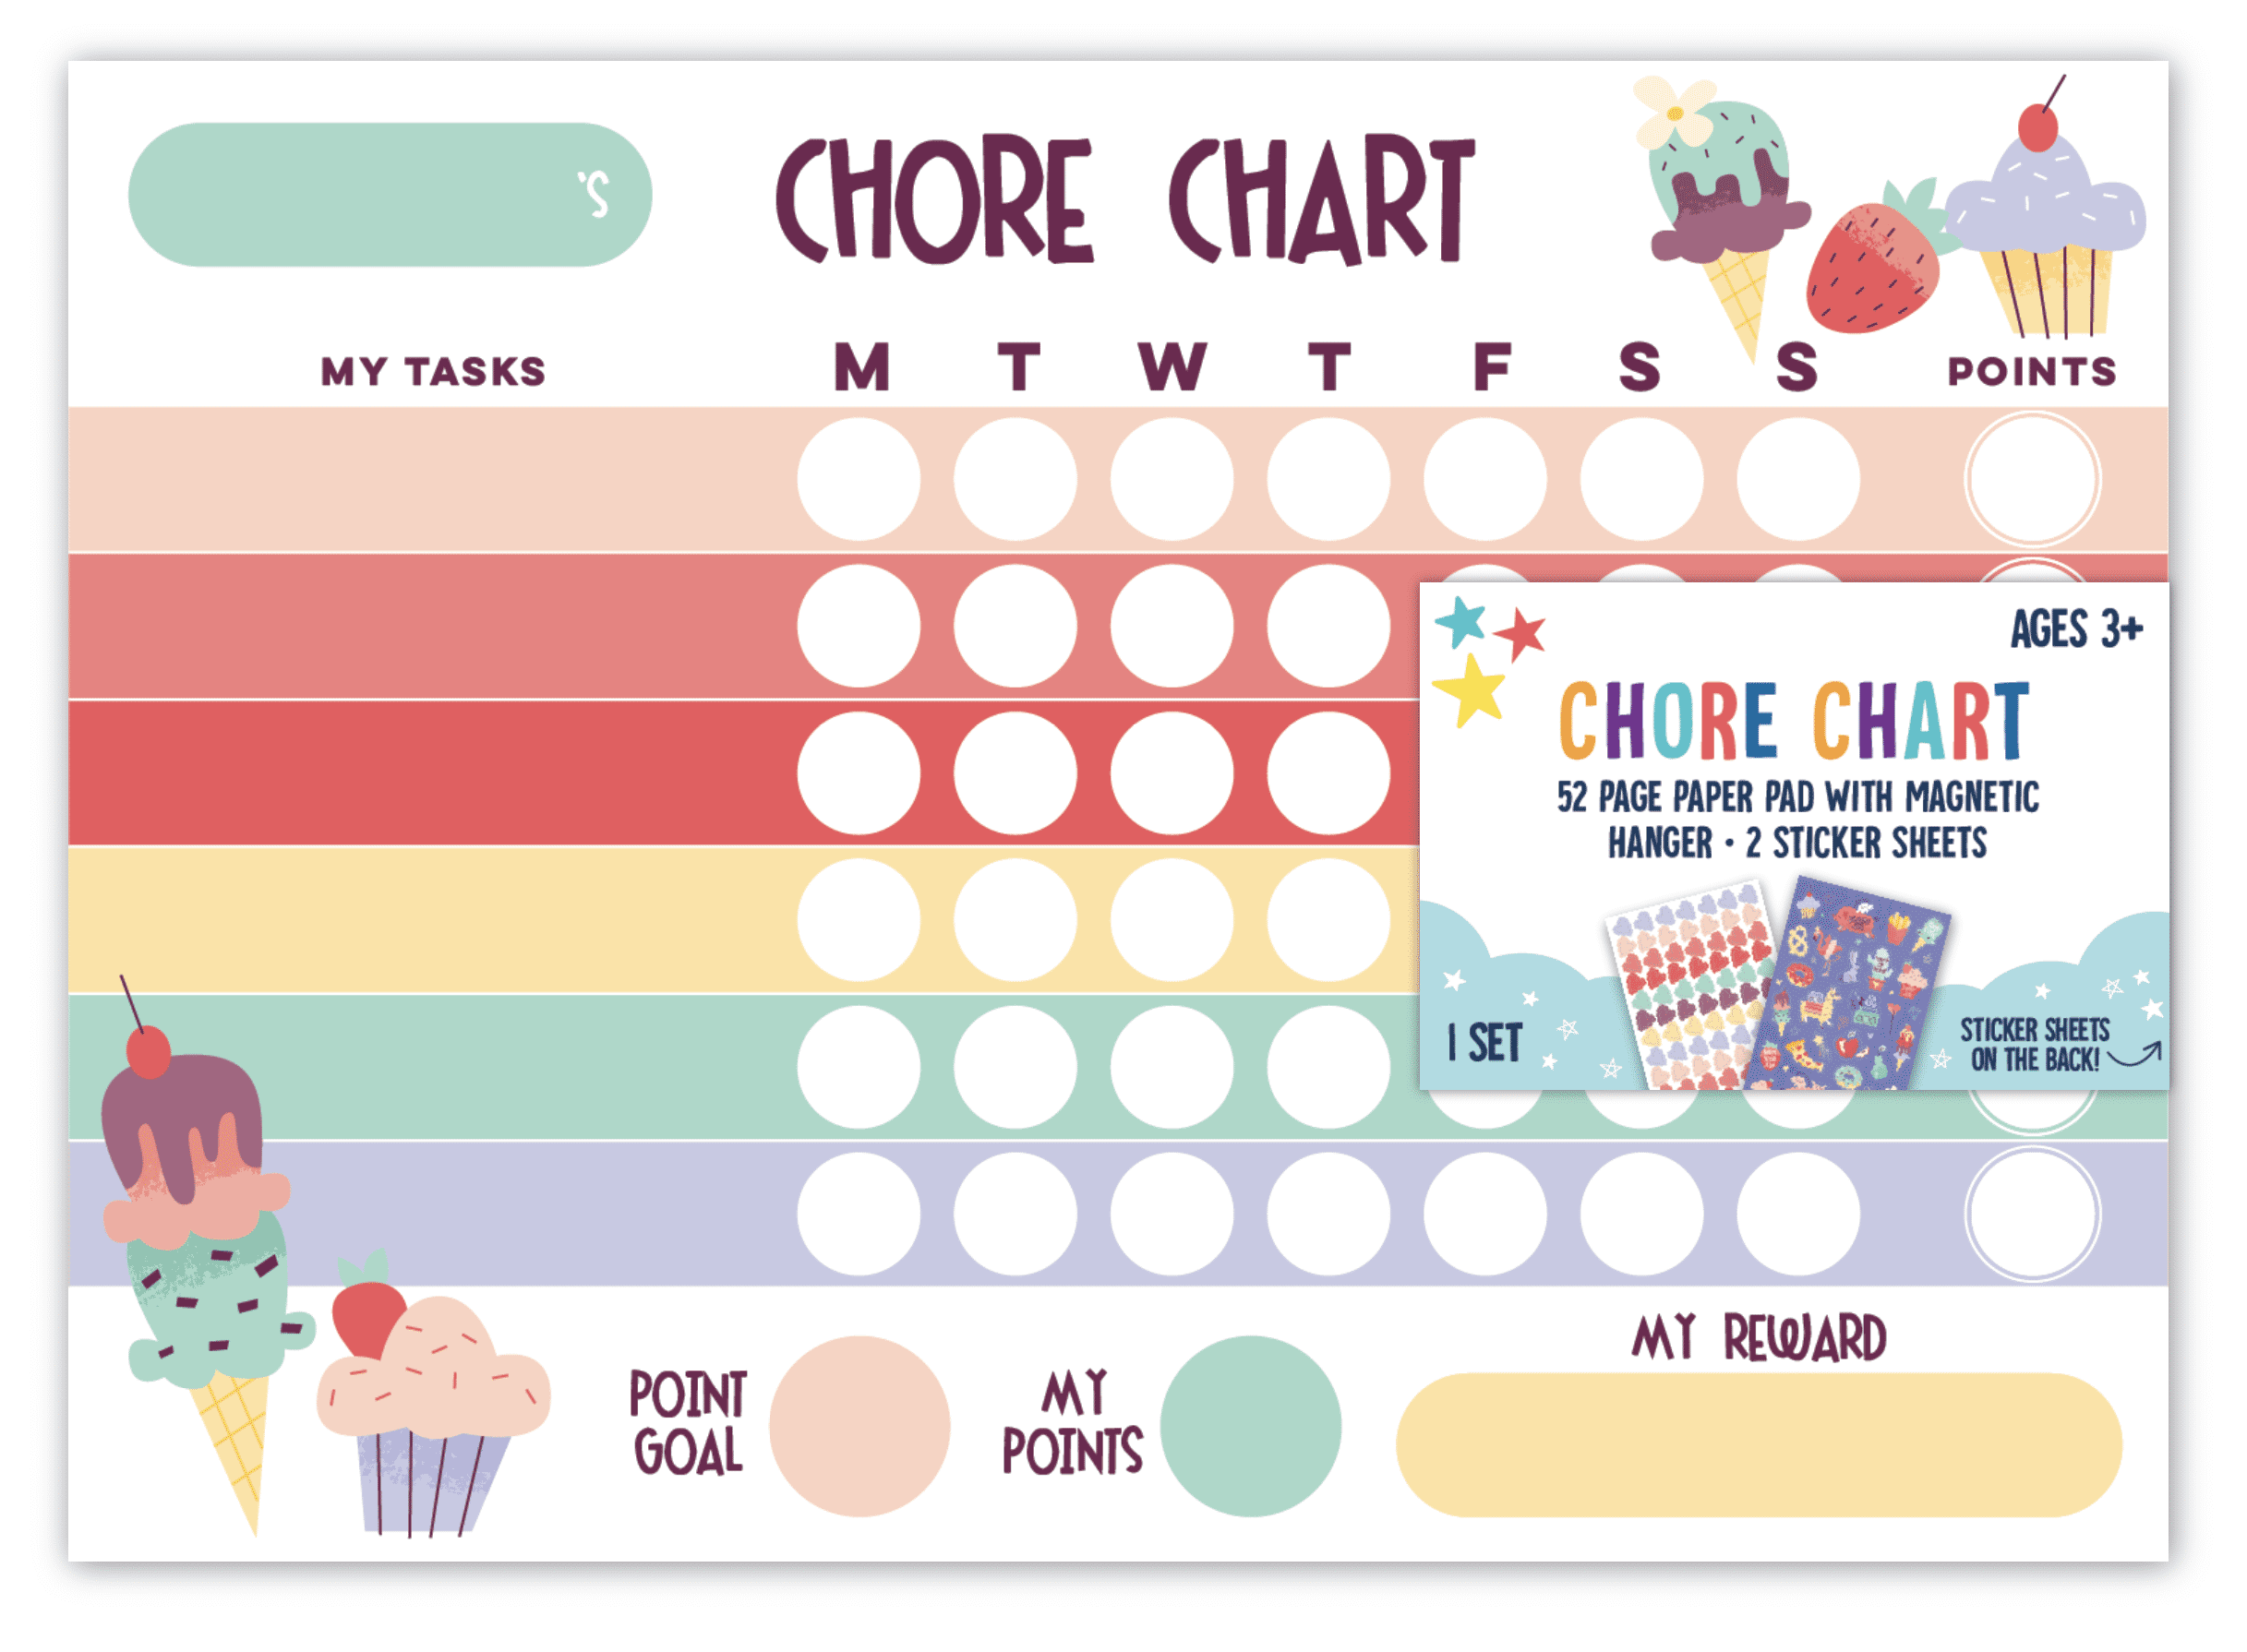 BUTTERFLY Points Reward Chart behaviour-chores-potty FREE pen/stickers MAGENTIC 